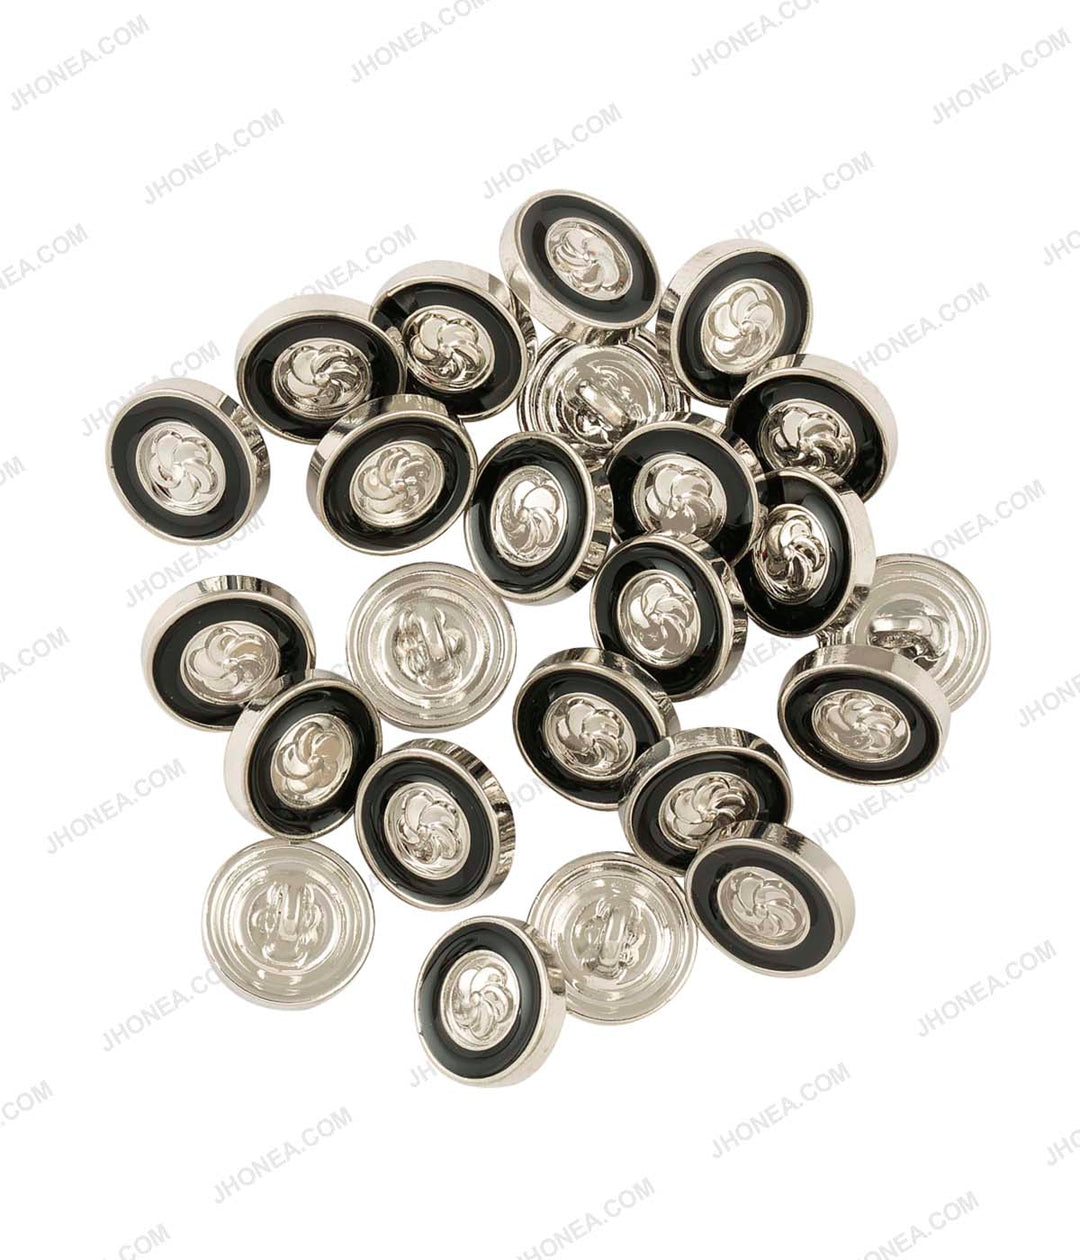 Shiny Embossed Flower Enamel Rim Border 10mm Shiny Silver with Black Color Shirt Buttons